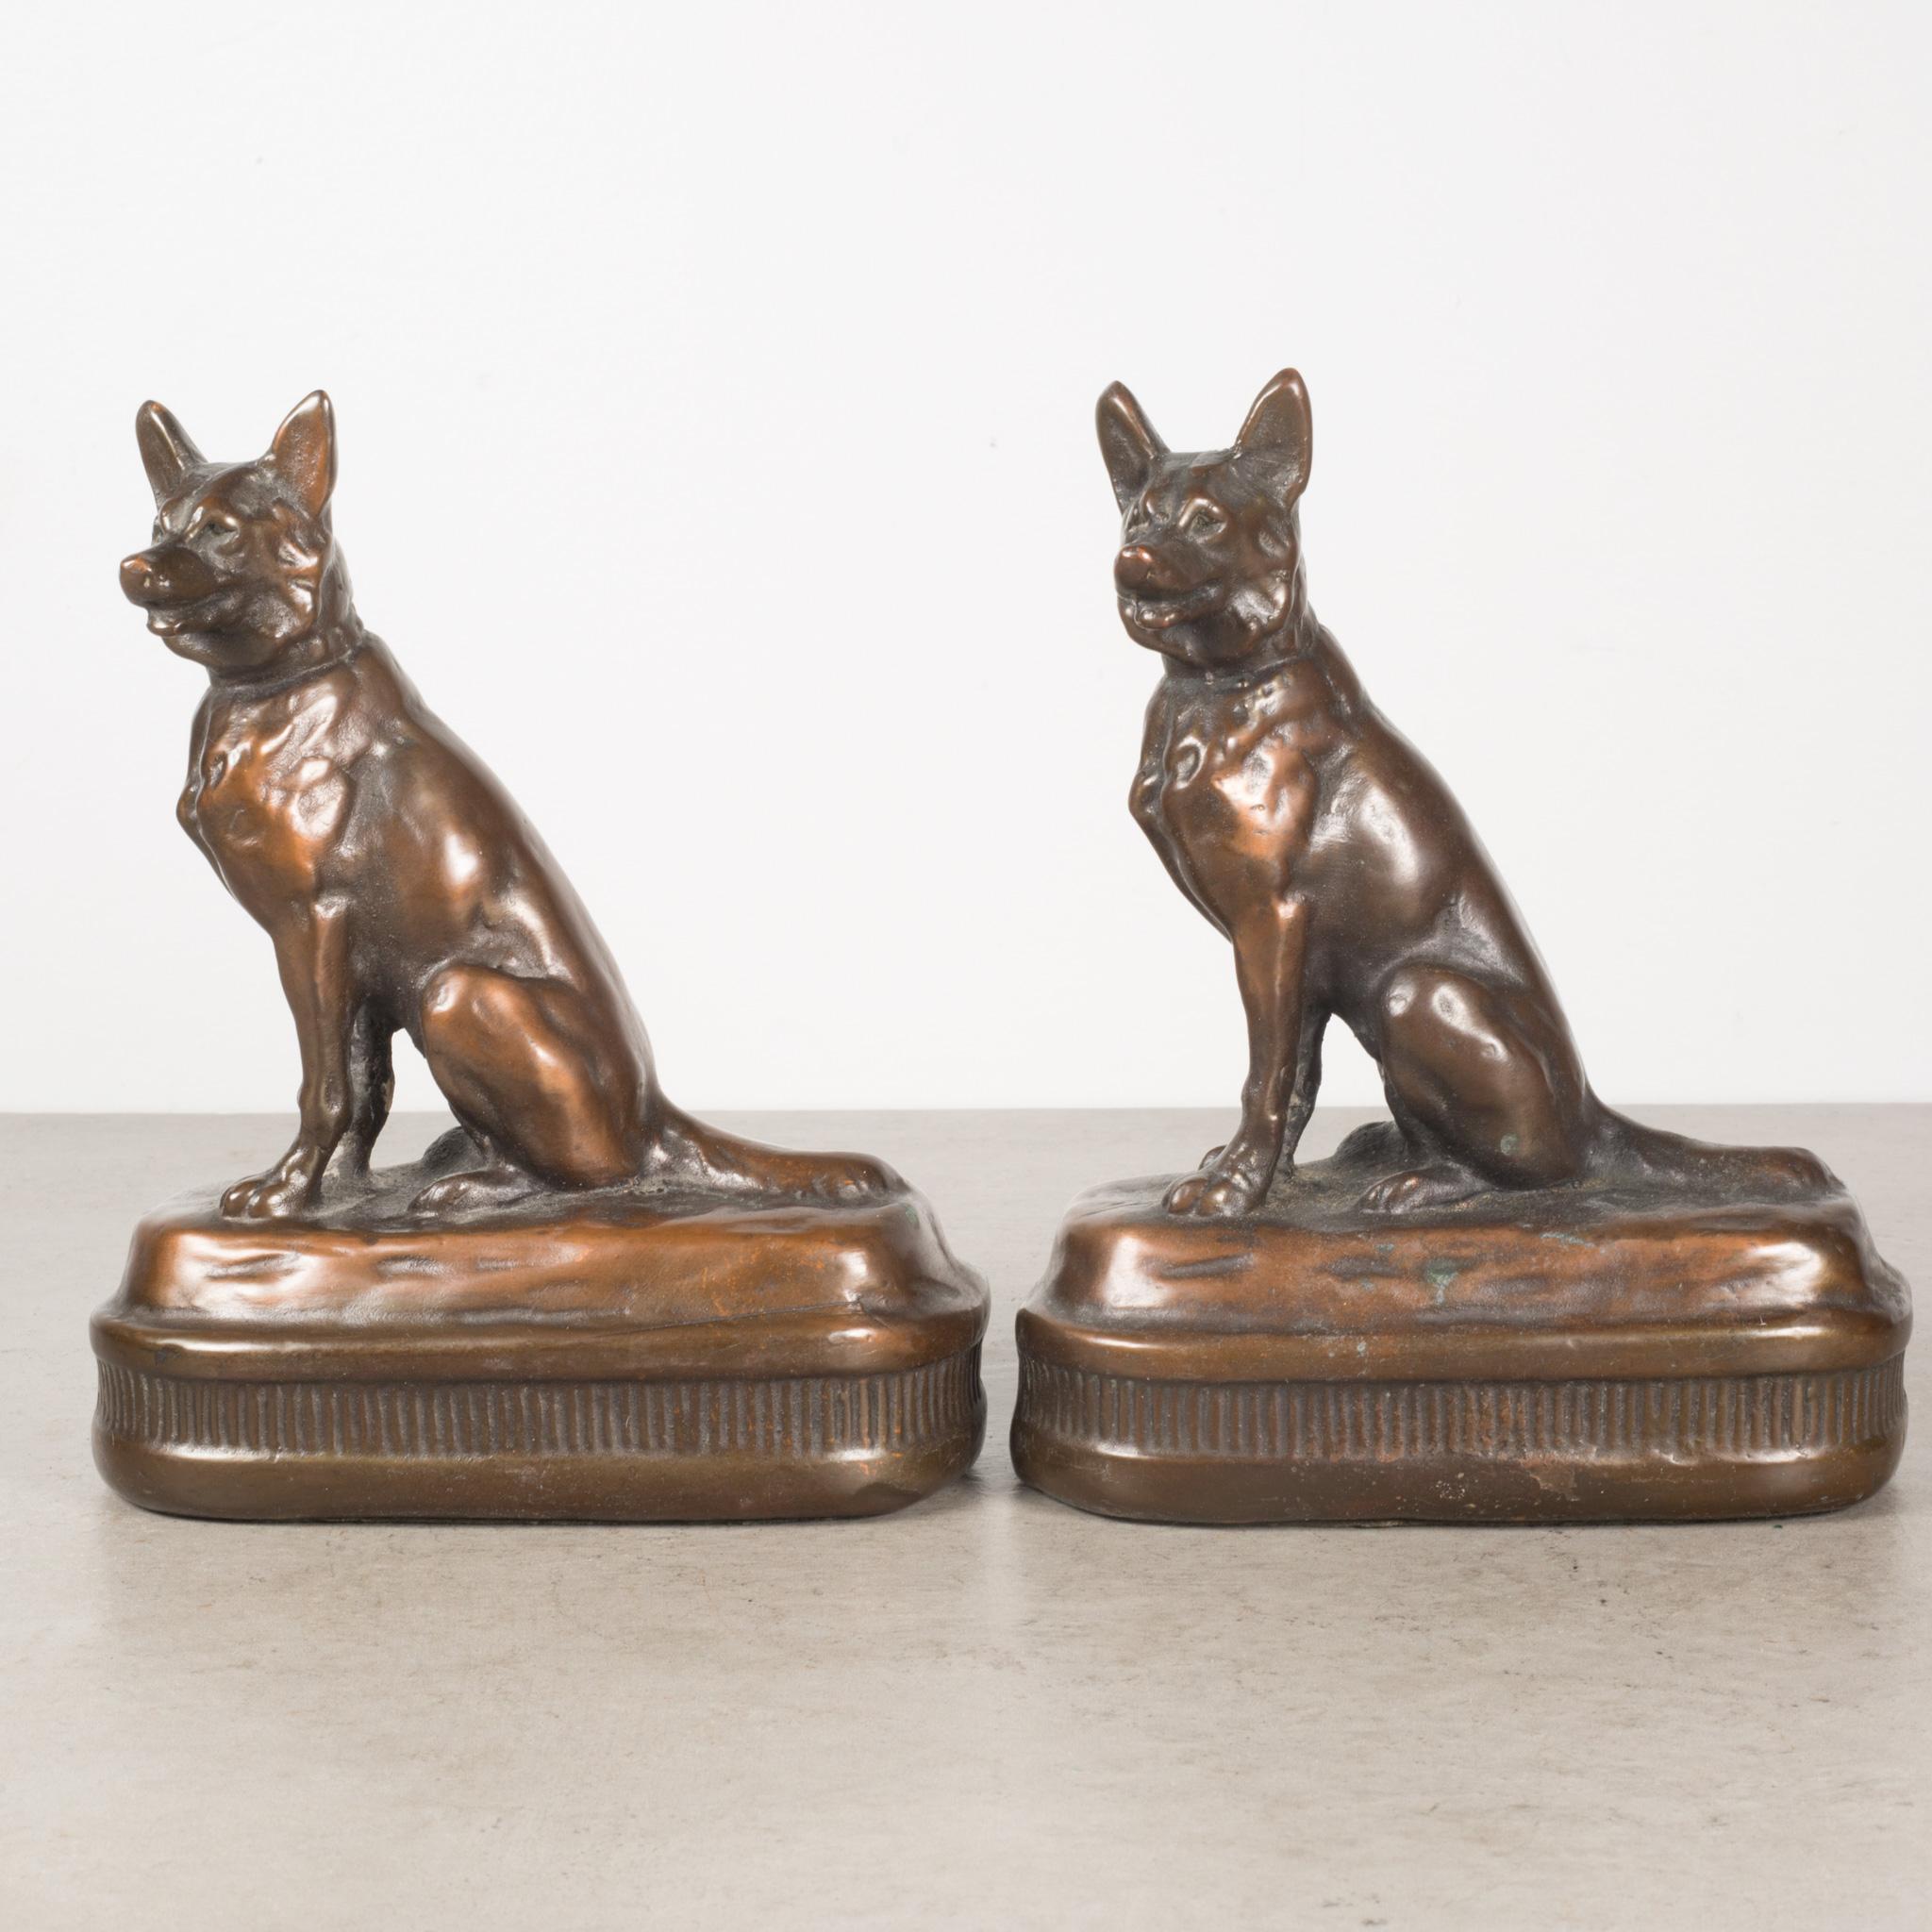 About

This is an original pair of Art Deco cast bronze German Shepherd bookends manufactured by Armor Bronze Company, New York USA. Both pieces have retained their original bronze finish and are in excellent condition with appropriate patina for